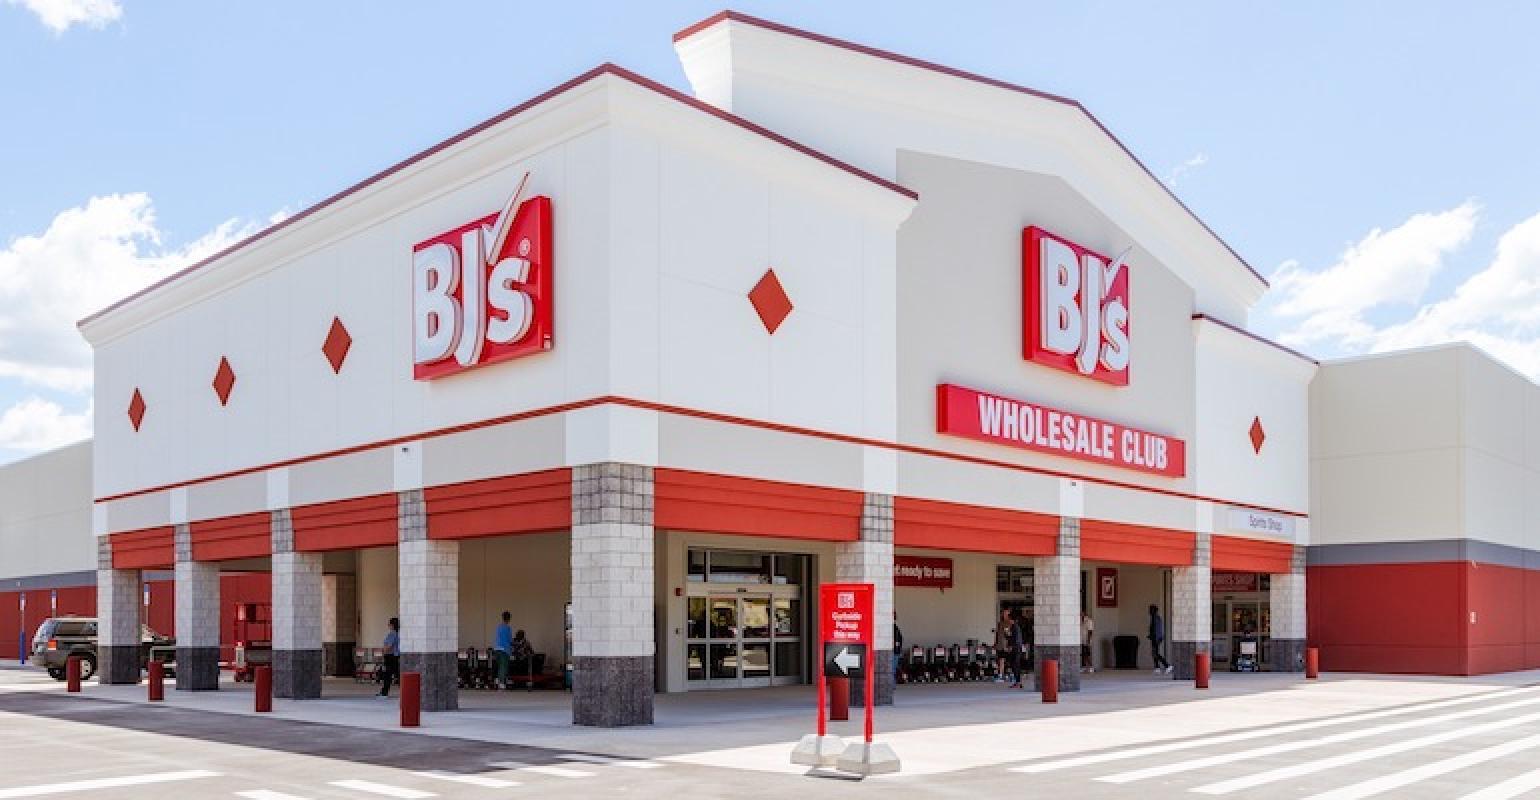 In Case You Missed it: BJ's Wholesale Club is Coming to Goodlettsville -  Sumner County Source